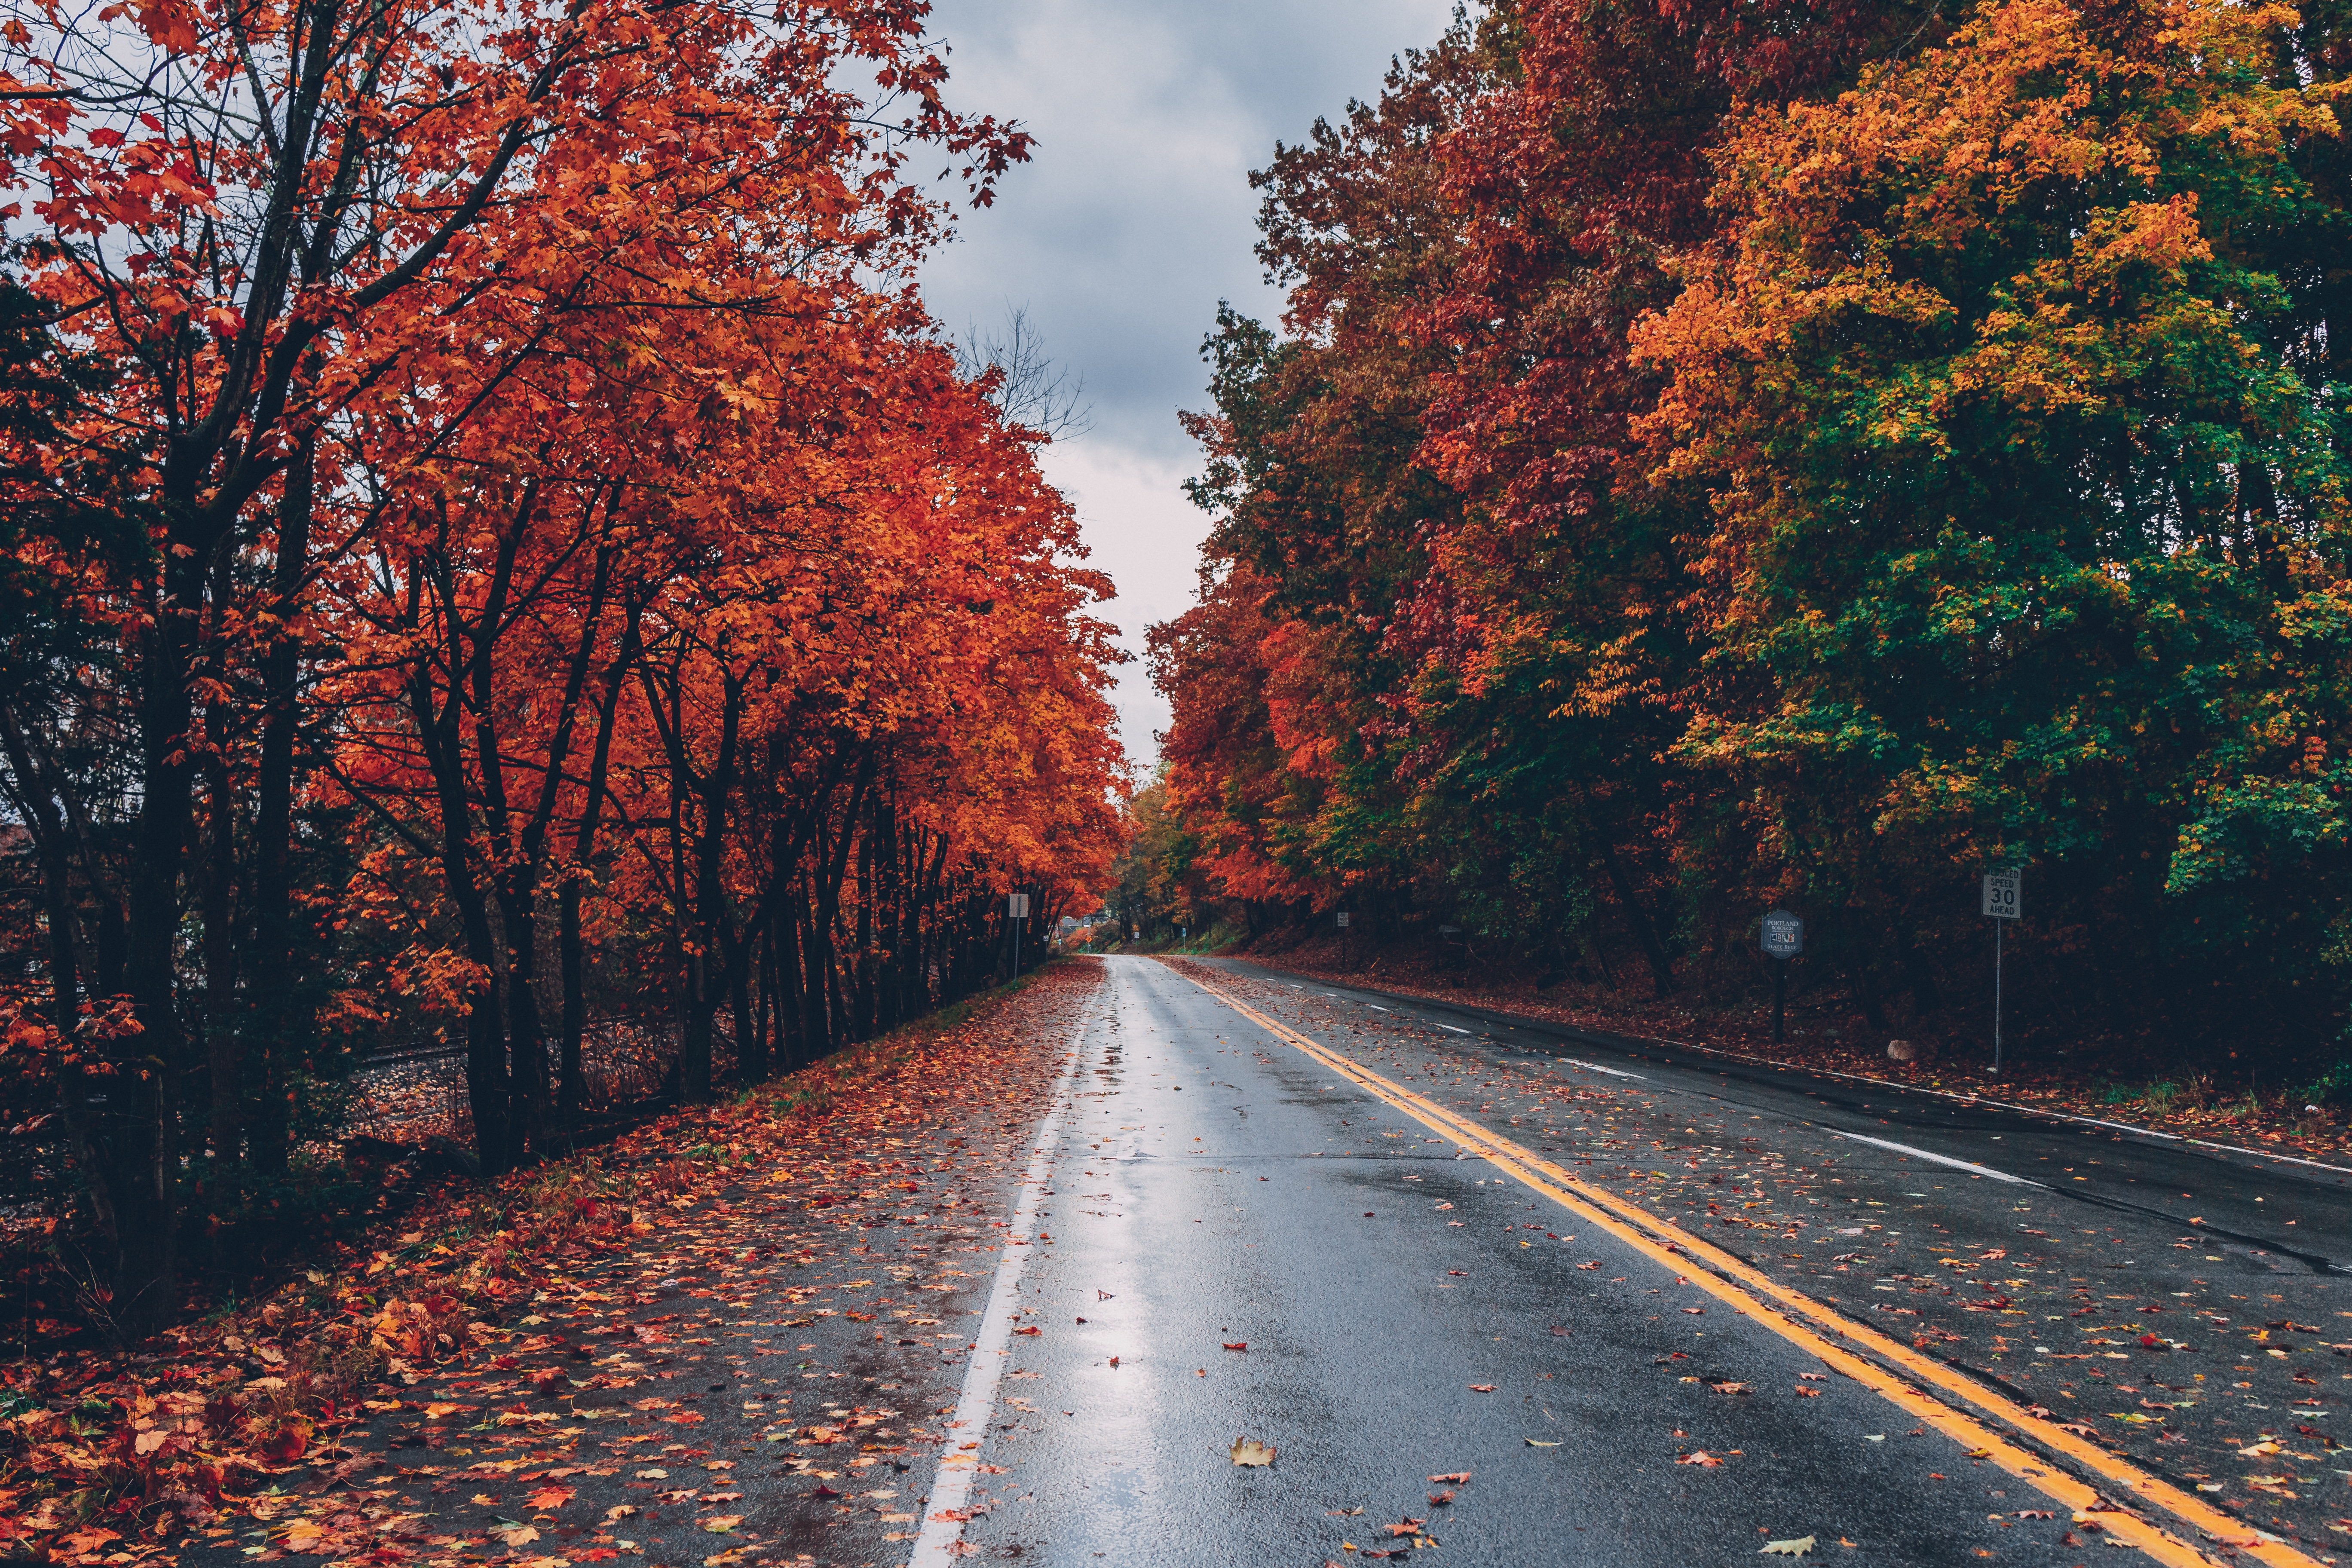 A damp road along a fall forest